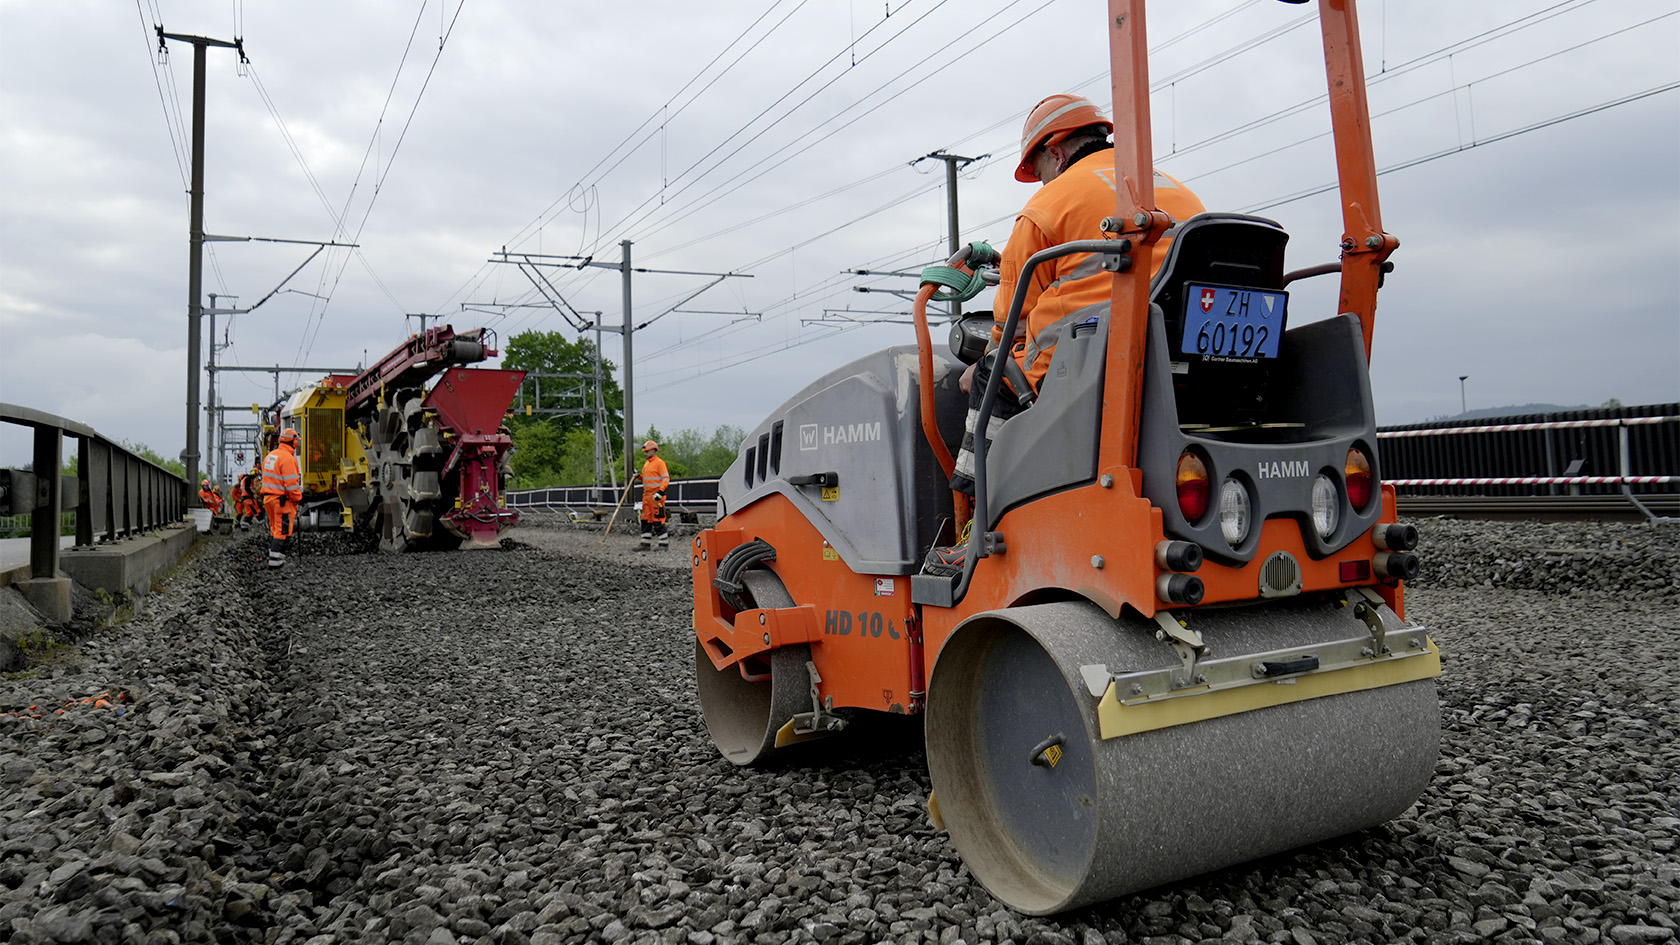 For railway construction works to upgrade the points in Aarau, Switzerland, the Hamm HD 10C VV tandem roller was deployed to complete the ballast works.